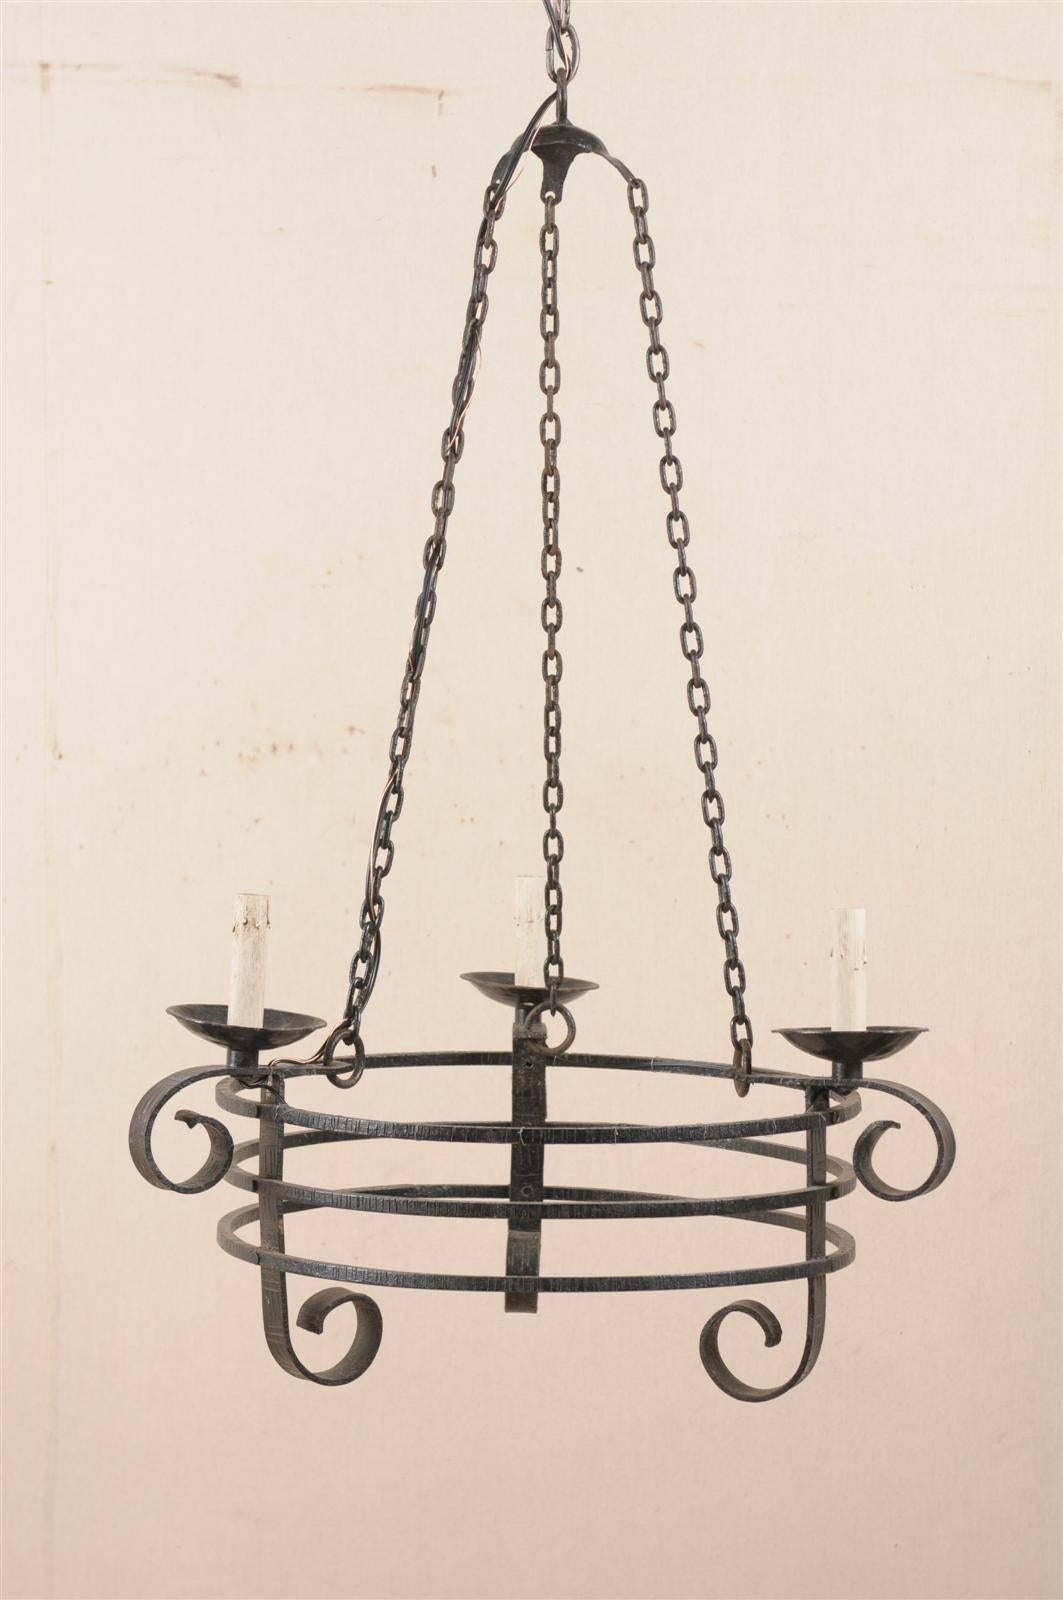 A French vintage forged iron three-light chandelier. This unusually shaped mid-20th century forged iron chandelier features a circular central part made of three rings, supporting three scrolled arms. Three chains are hooked up together at the